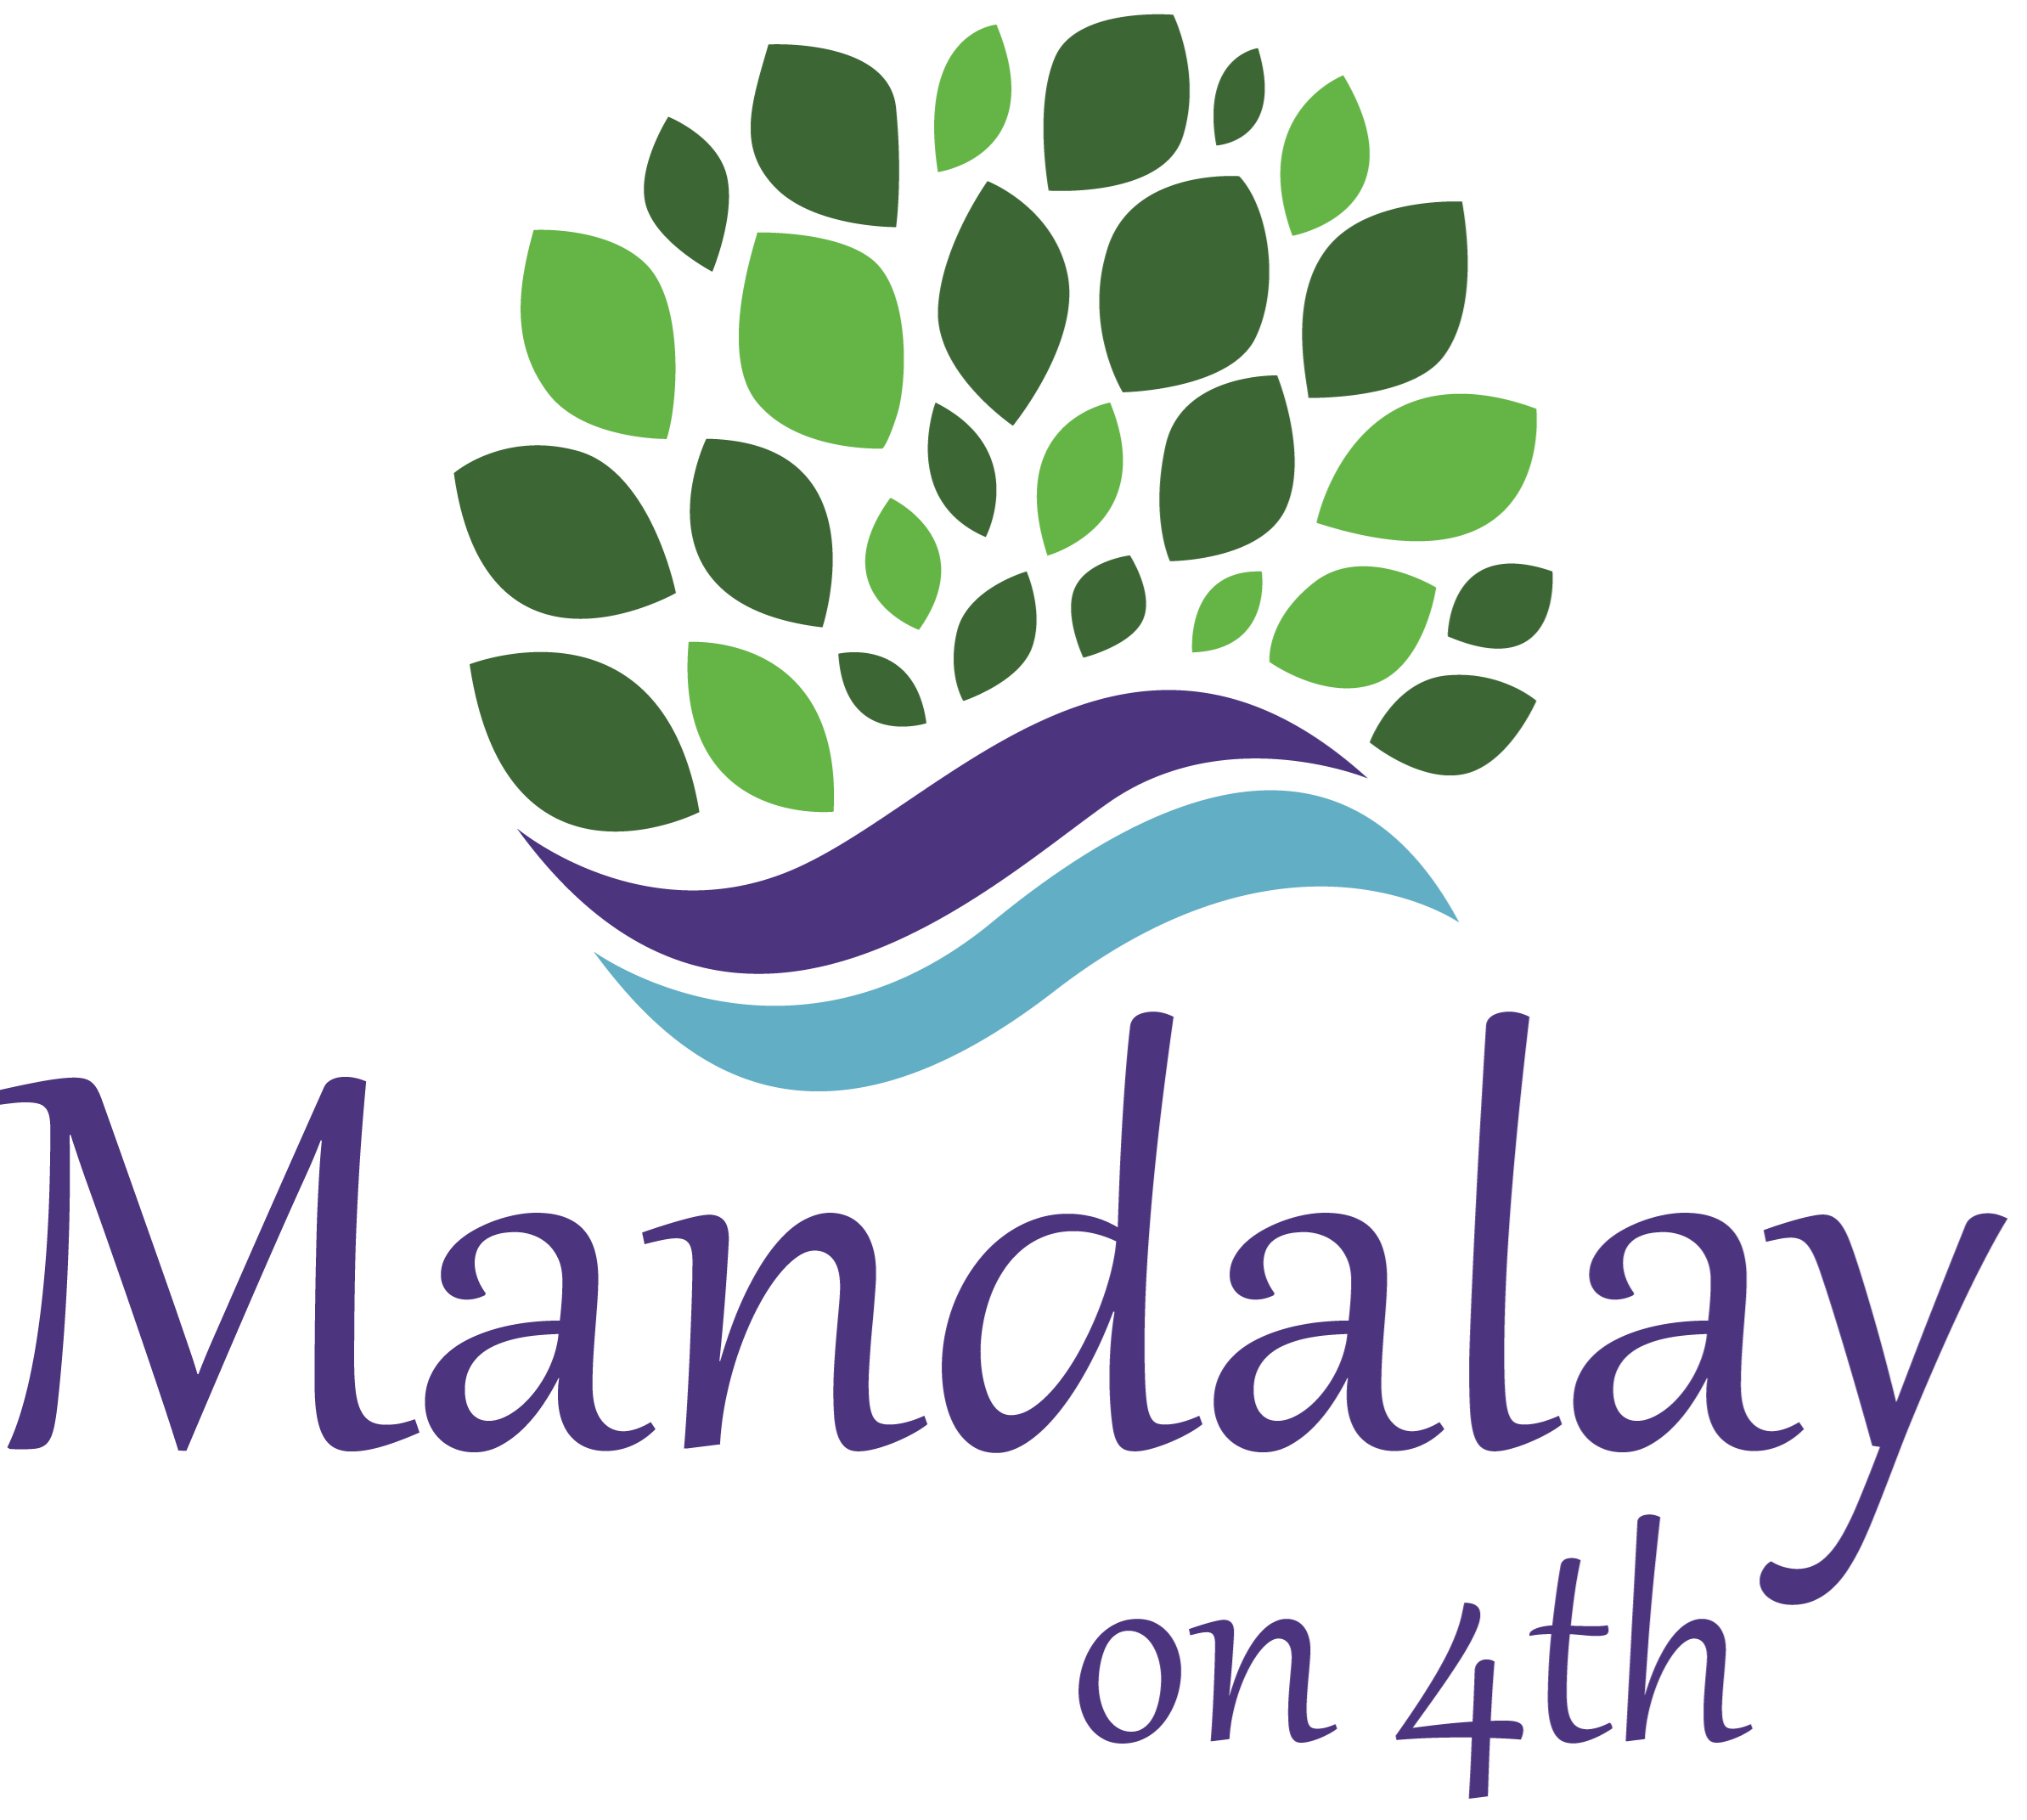 Mandalay on 4th | Apartments in St. Petersburg, FL